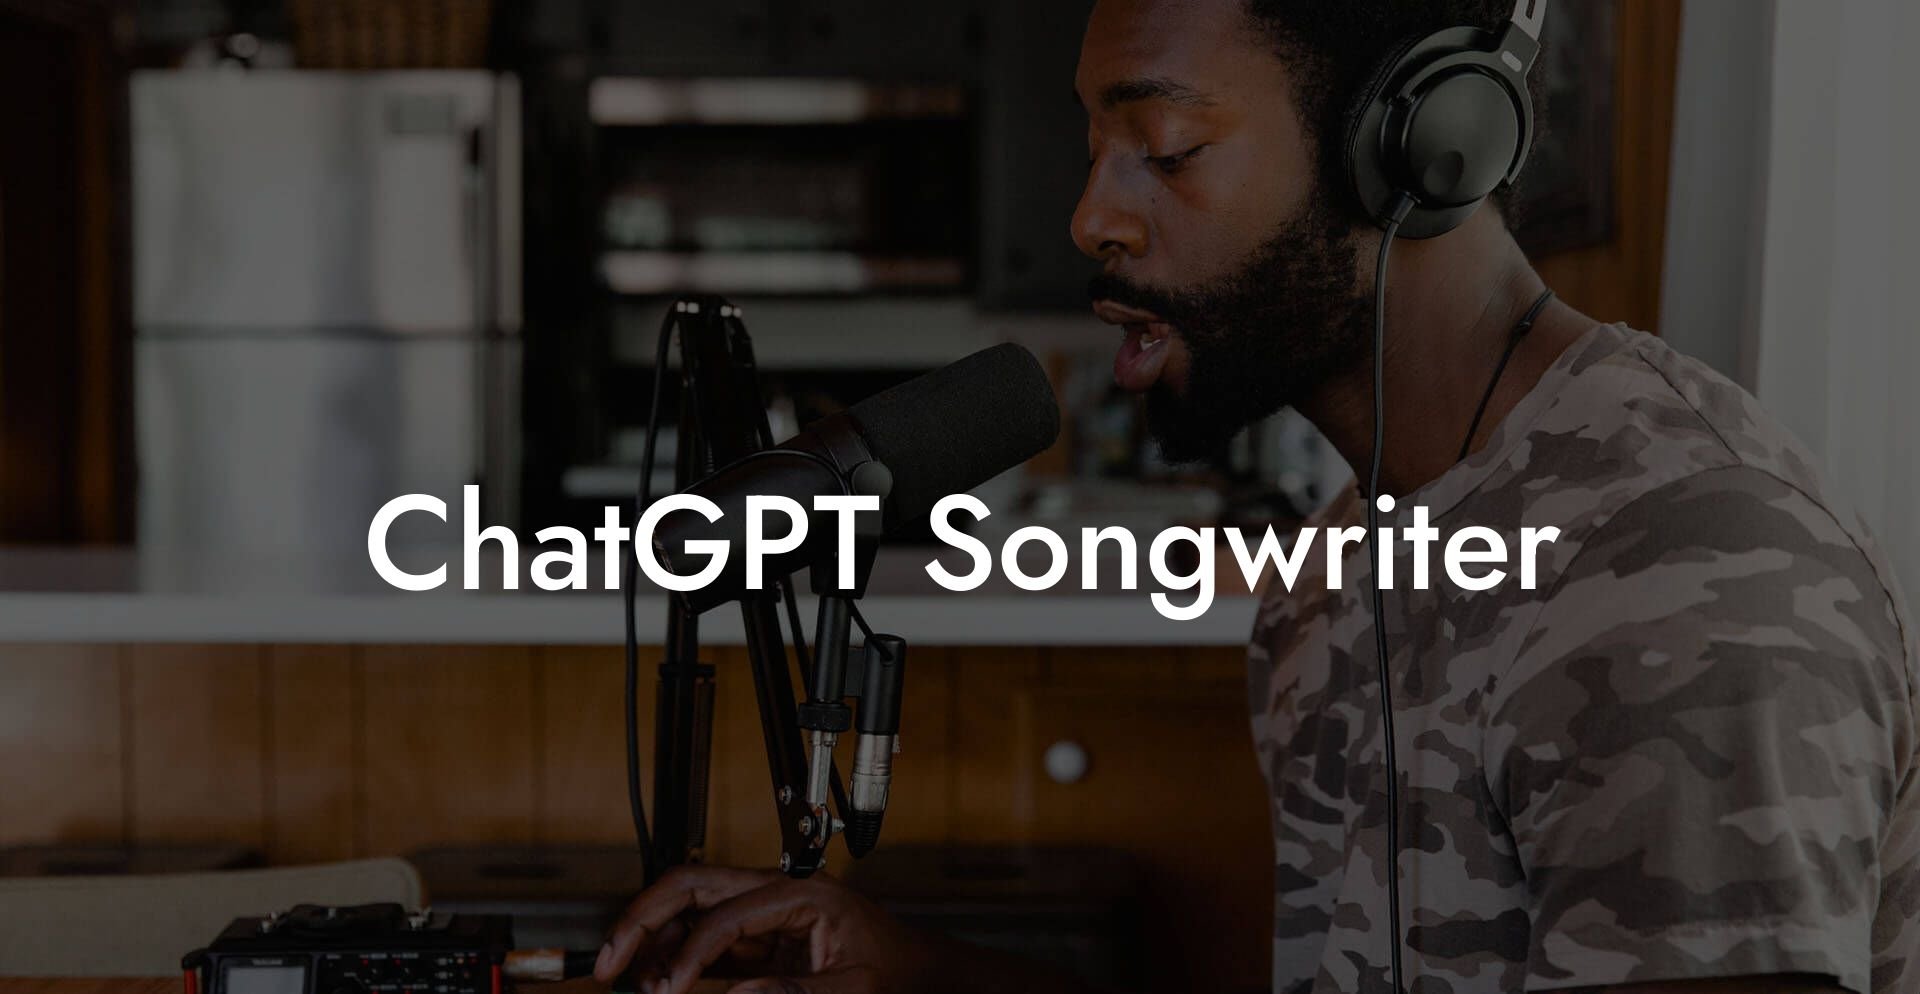 chatgpt songwriter lyric assistant